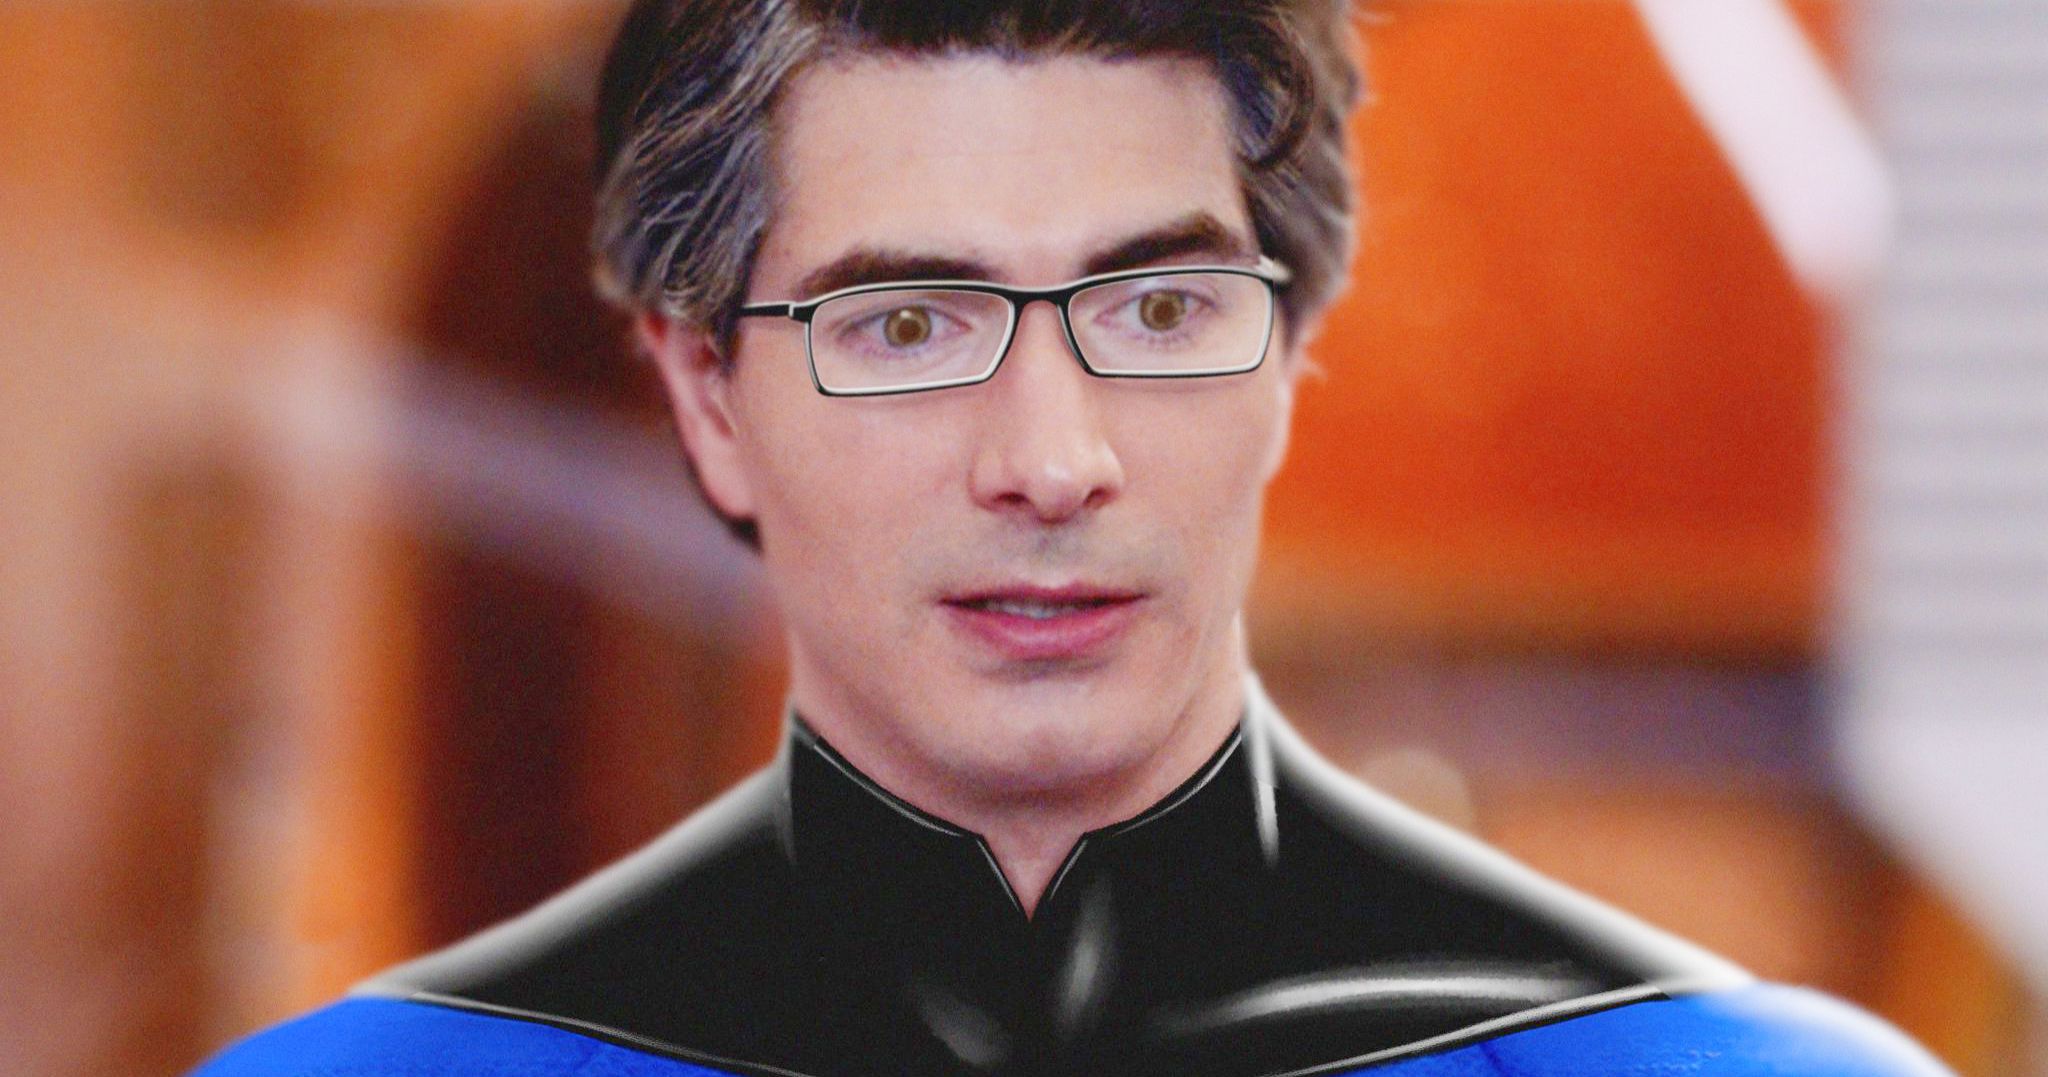 Superman Fans Want Brandon Routh as Reed Richards in the MCU's Fantastic Four Reboot